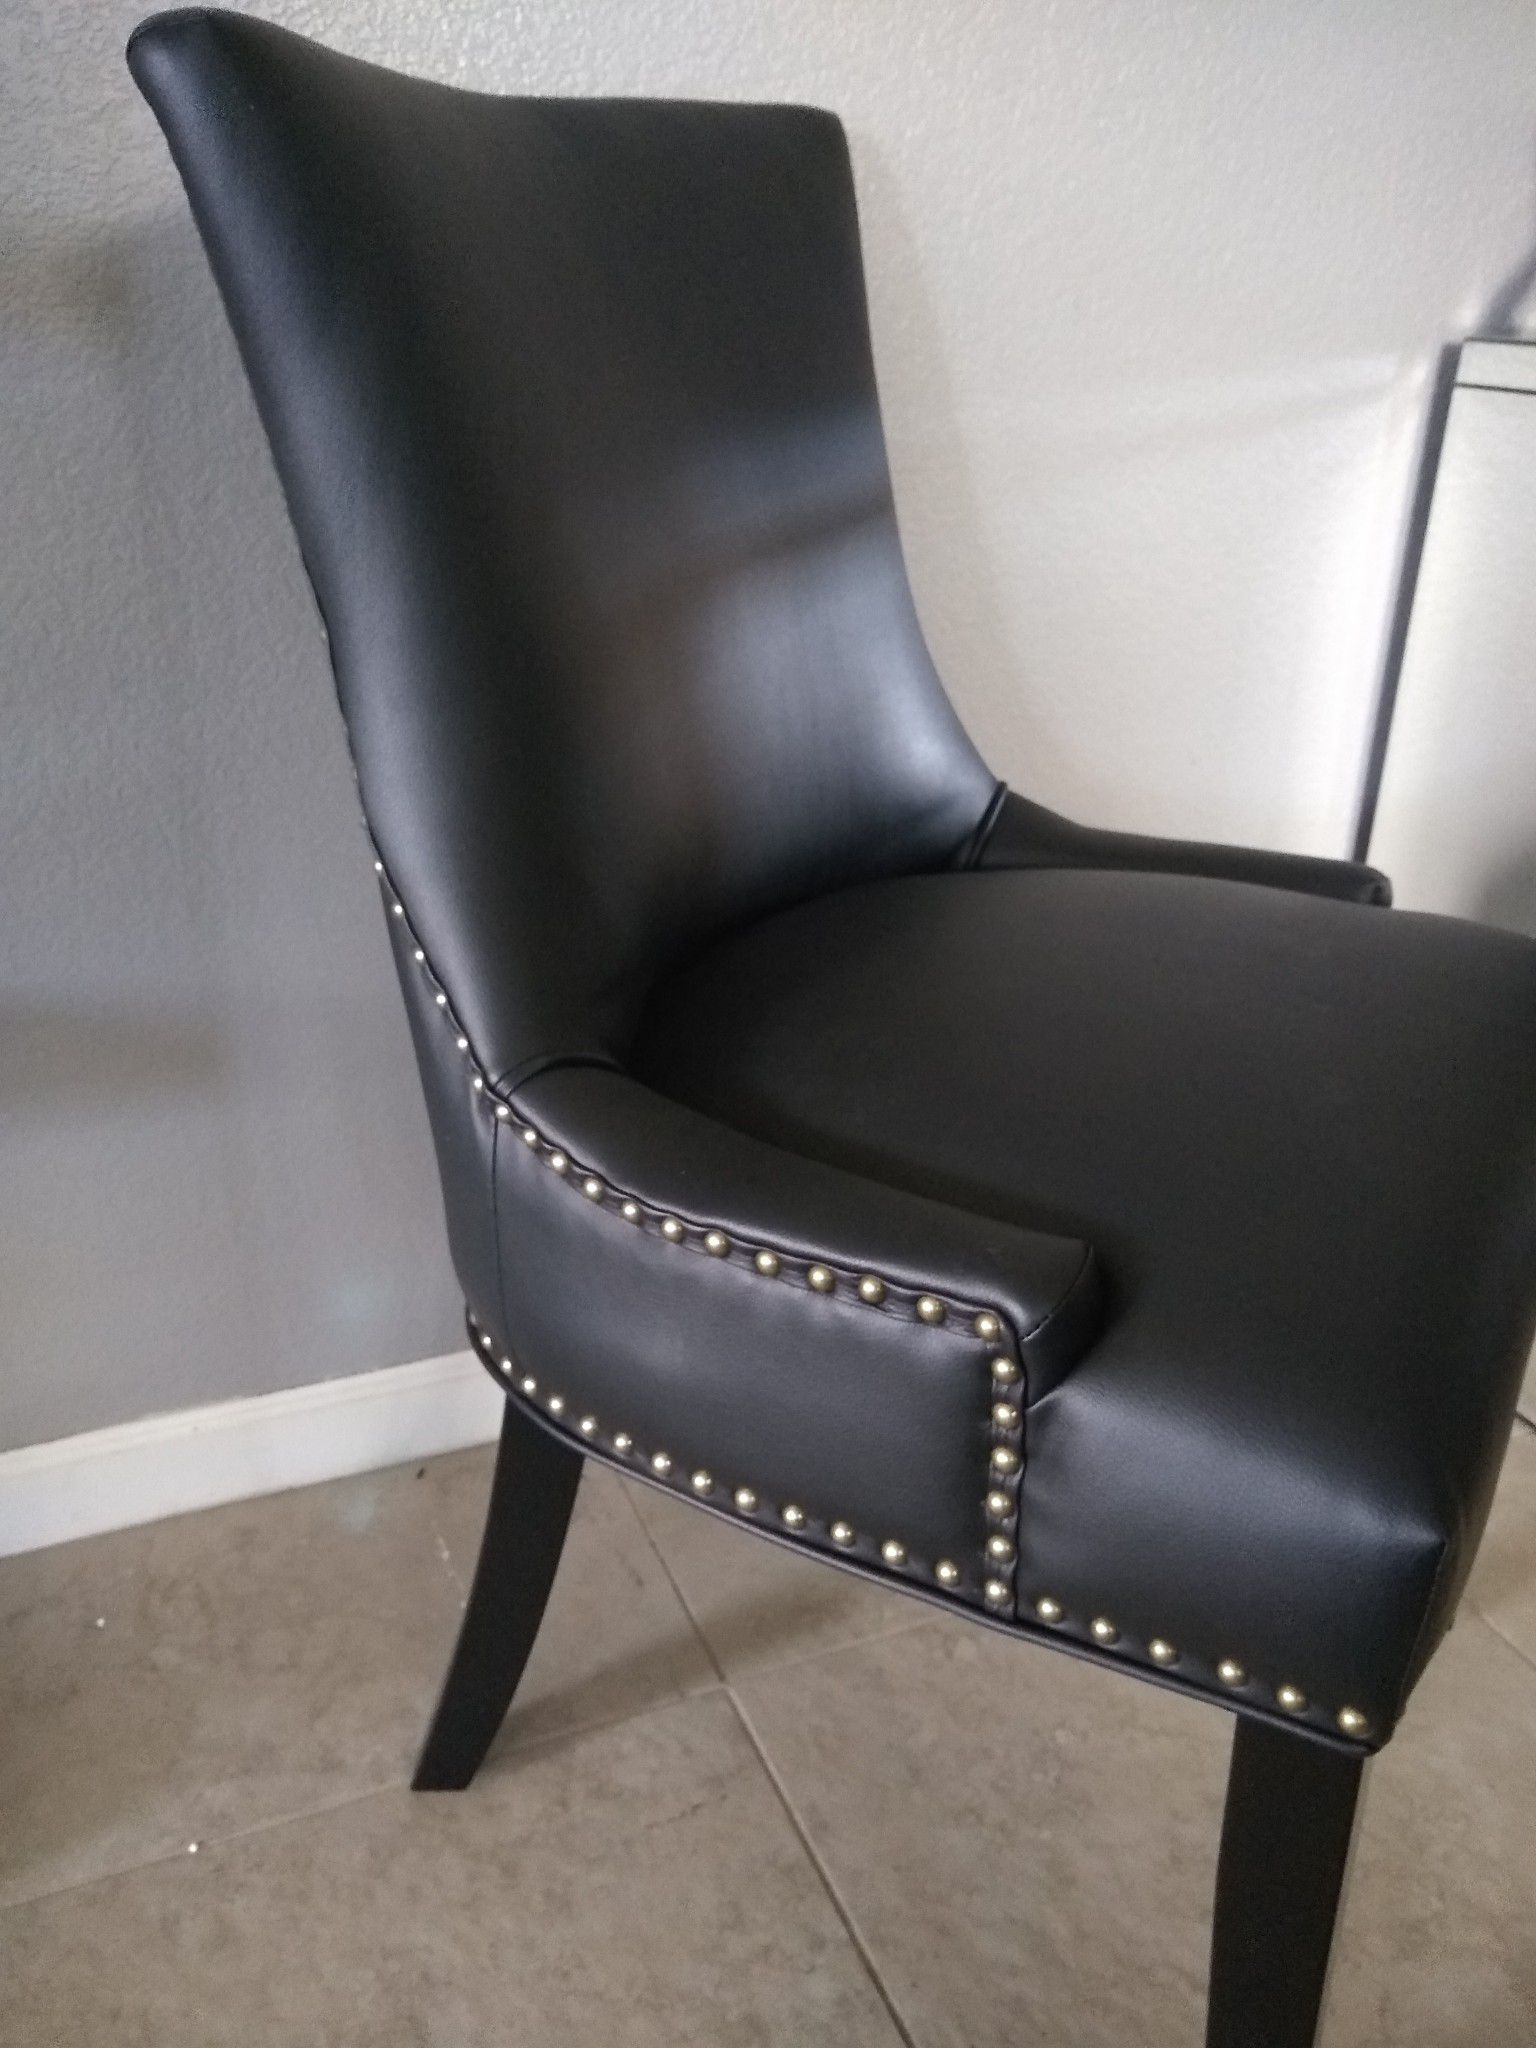 Nailhead Black Leather Dining / Accent Chairs 2 AVAILABLE $89 each! BRAND NEW